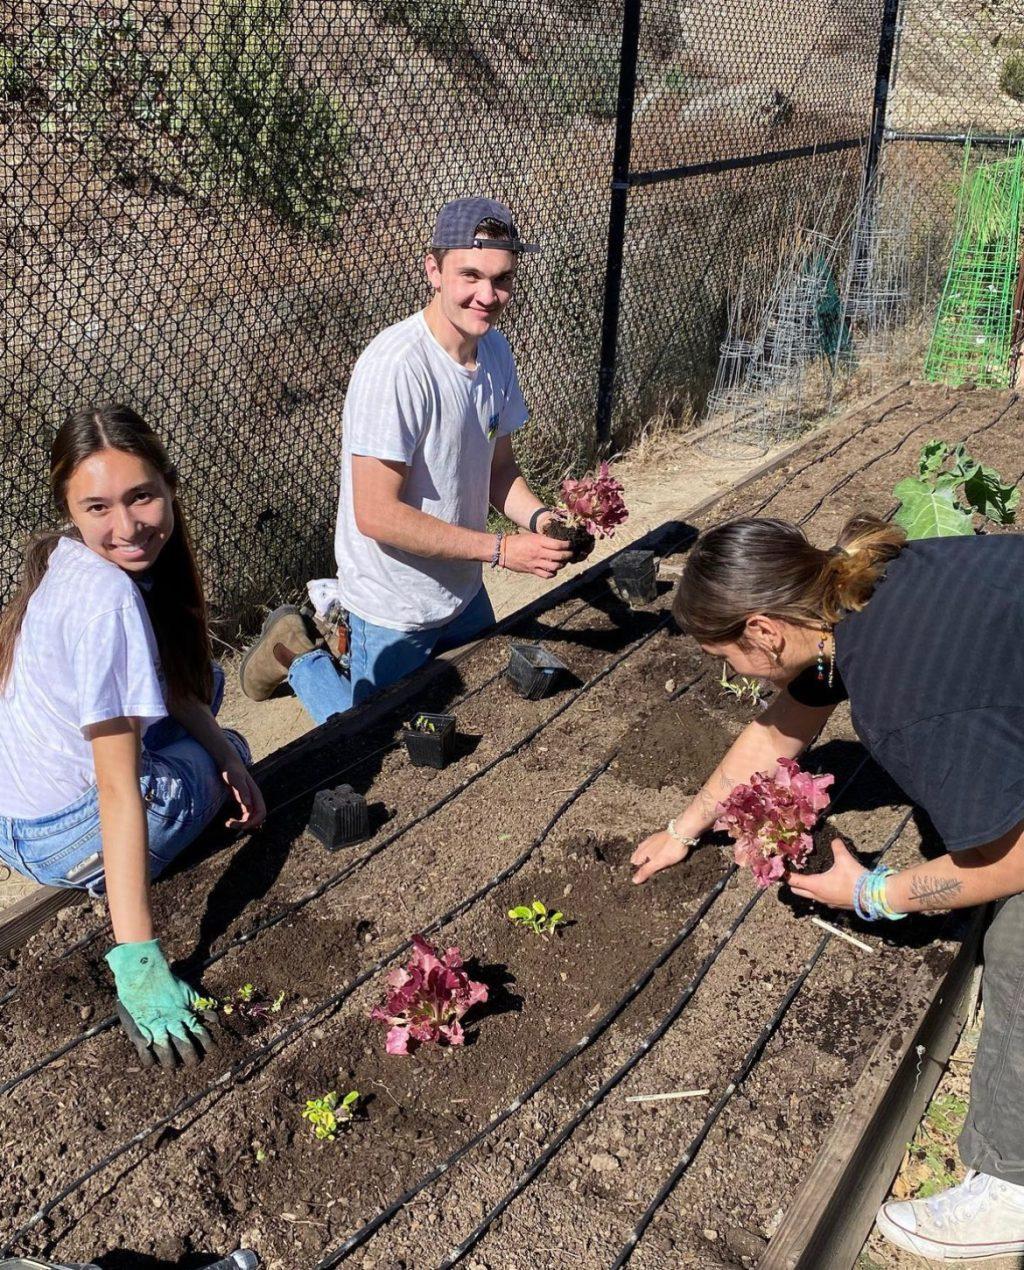 Senior Shea Tomlin and other students smile while planting carrots during the fall planting event at the community garden next to the Intramural Field on Nov. 4. Planting events allow crops to bloom before the next season arrives, according to the community garden's Instagram page. Photo courtesy of Mallory Finley